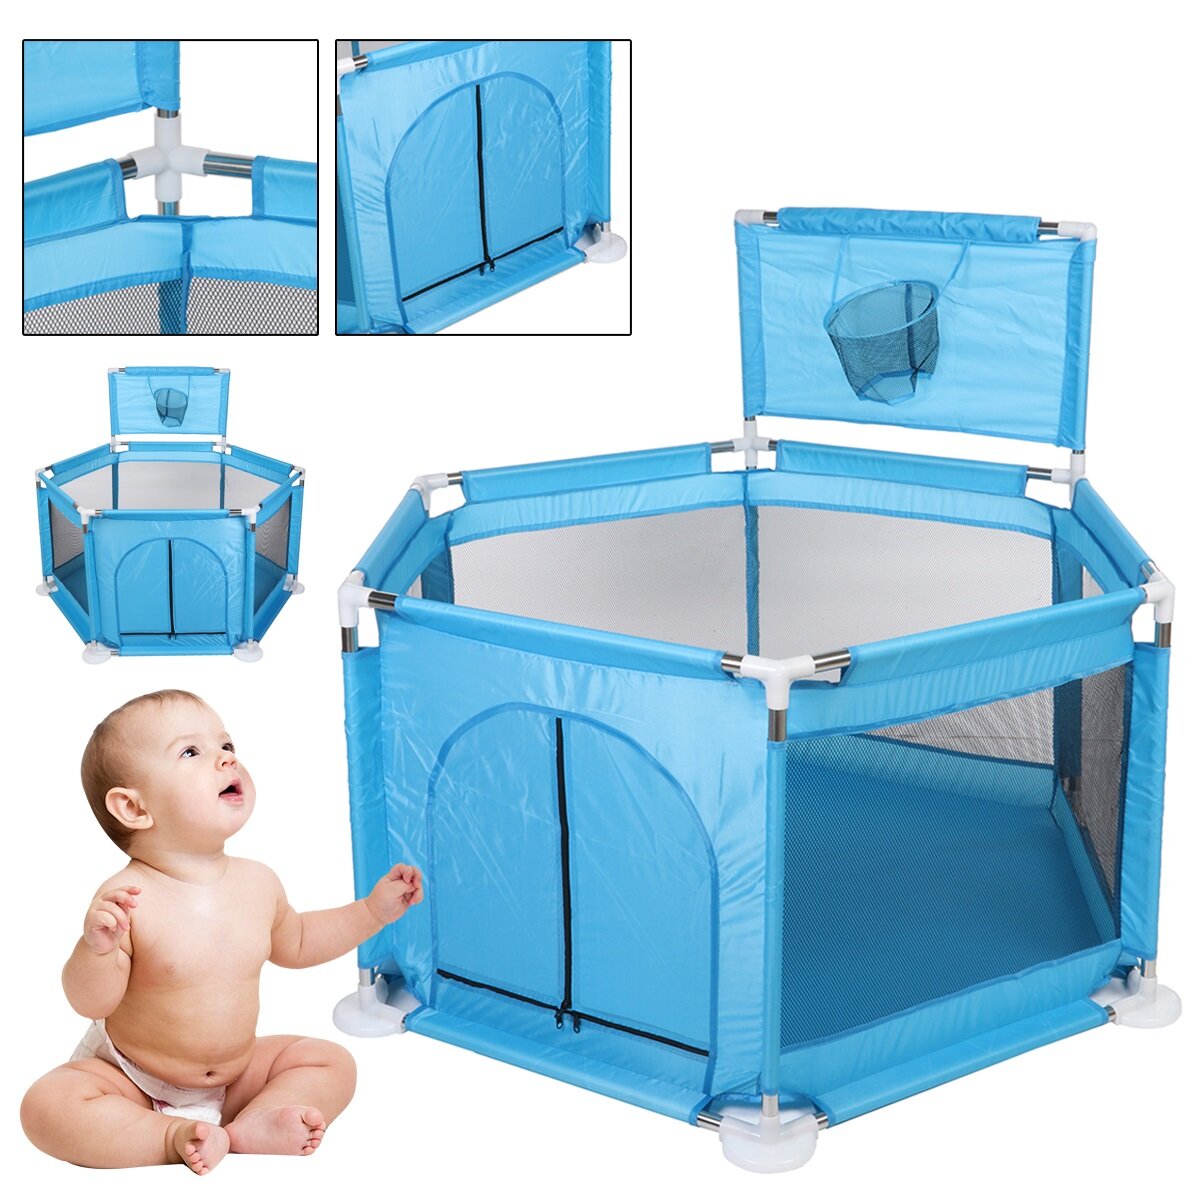 Image of Baby Portable Children's Playpen Folding Child Fence Child Safety Barrier Ball Pool Kids Bed Fence Playpen Dry Pool for